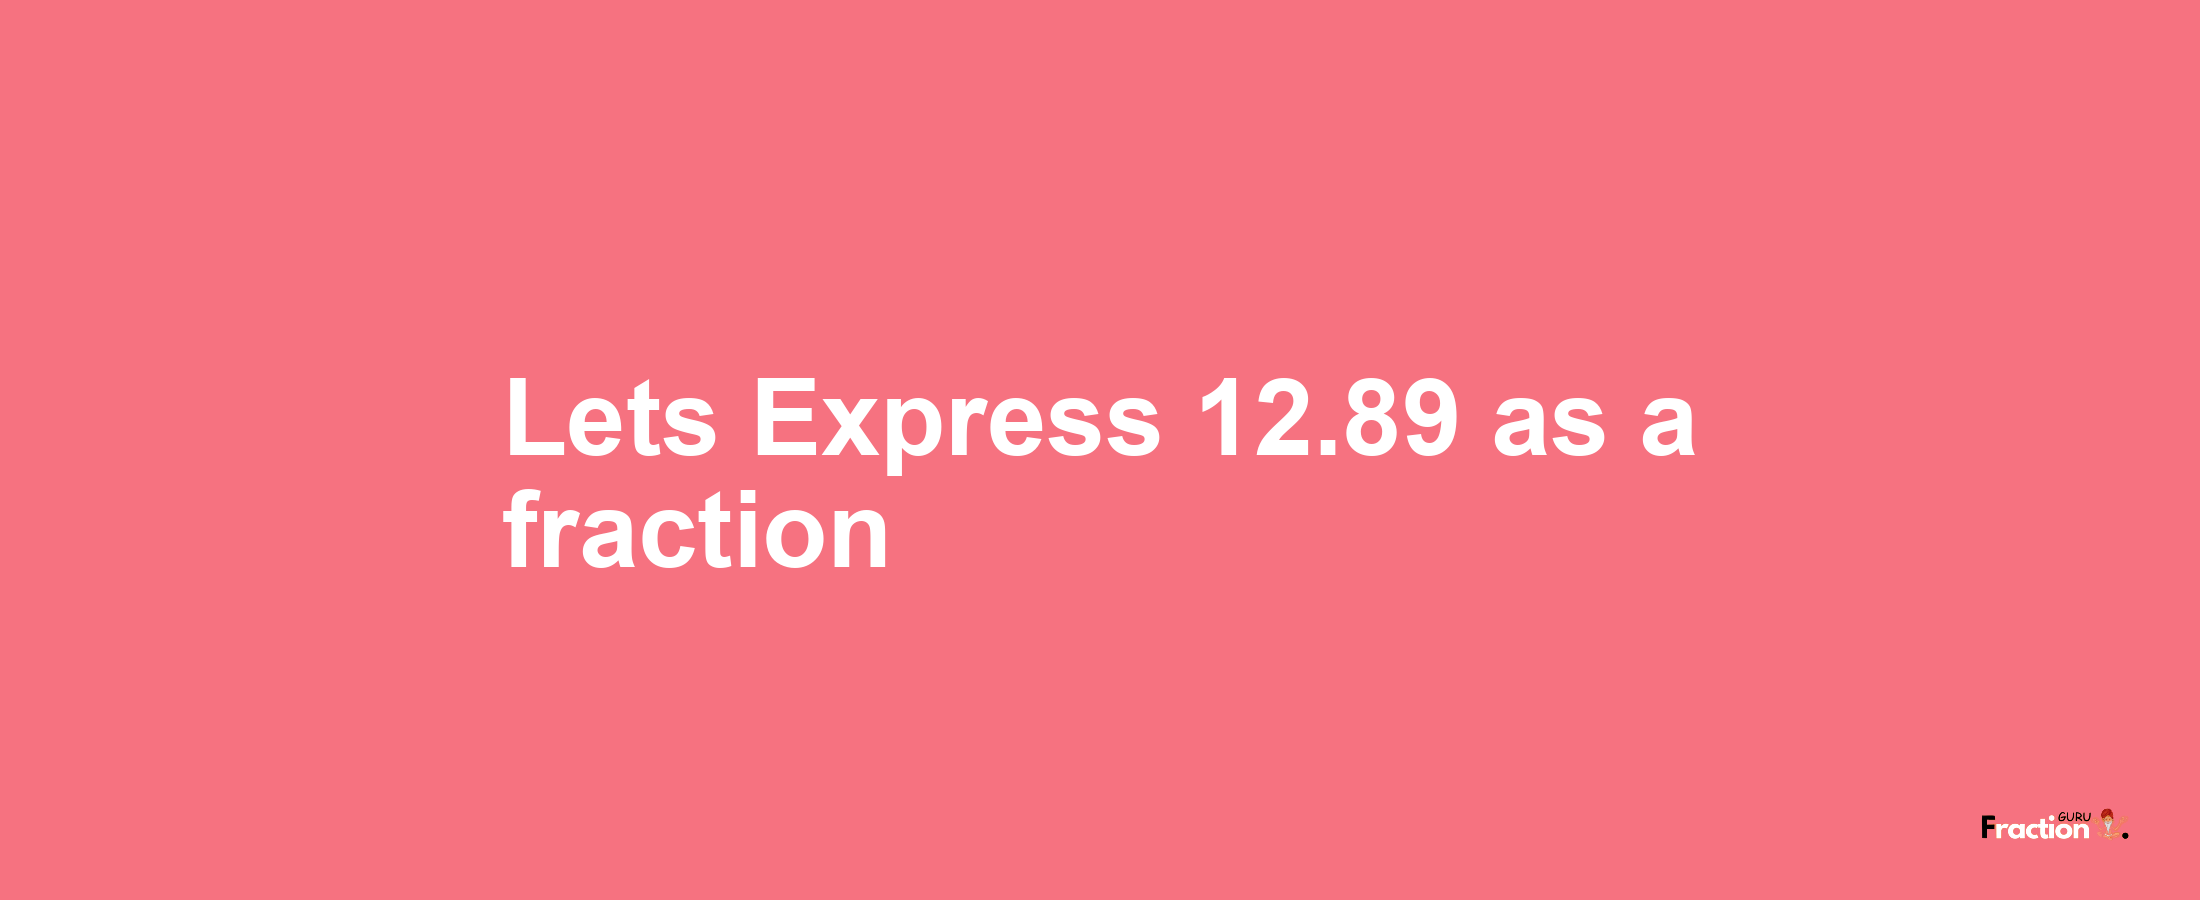 Lets Express 12.89 as afraction